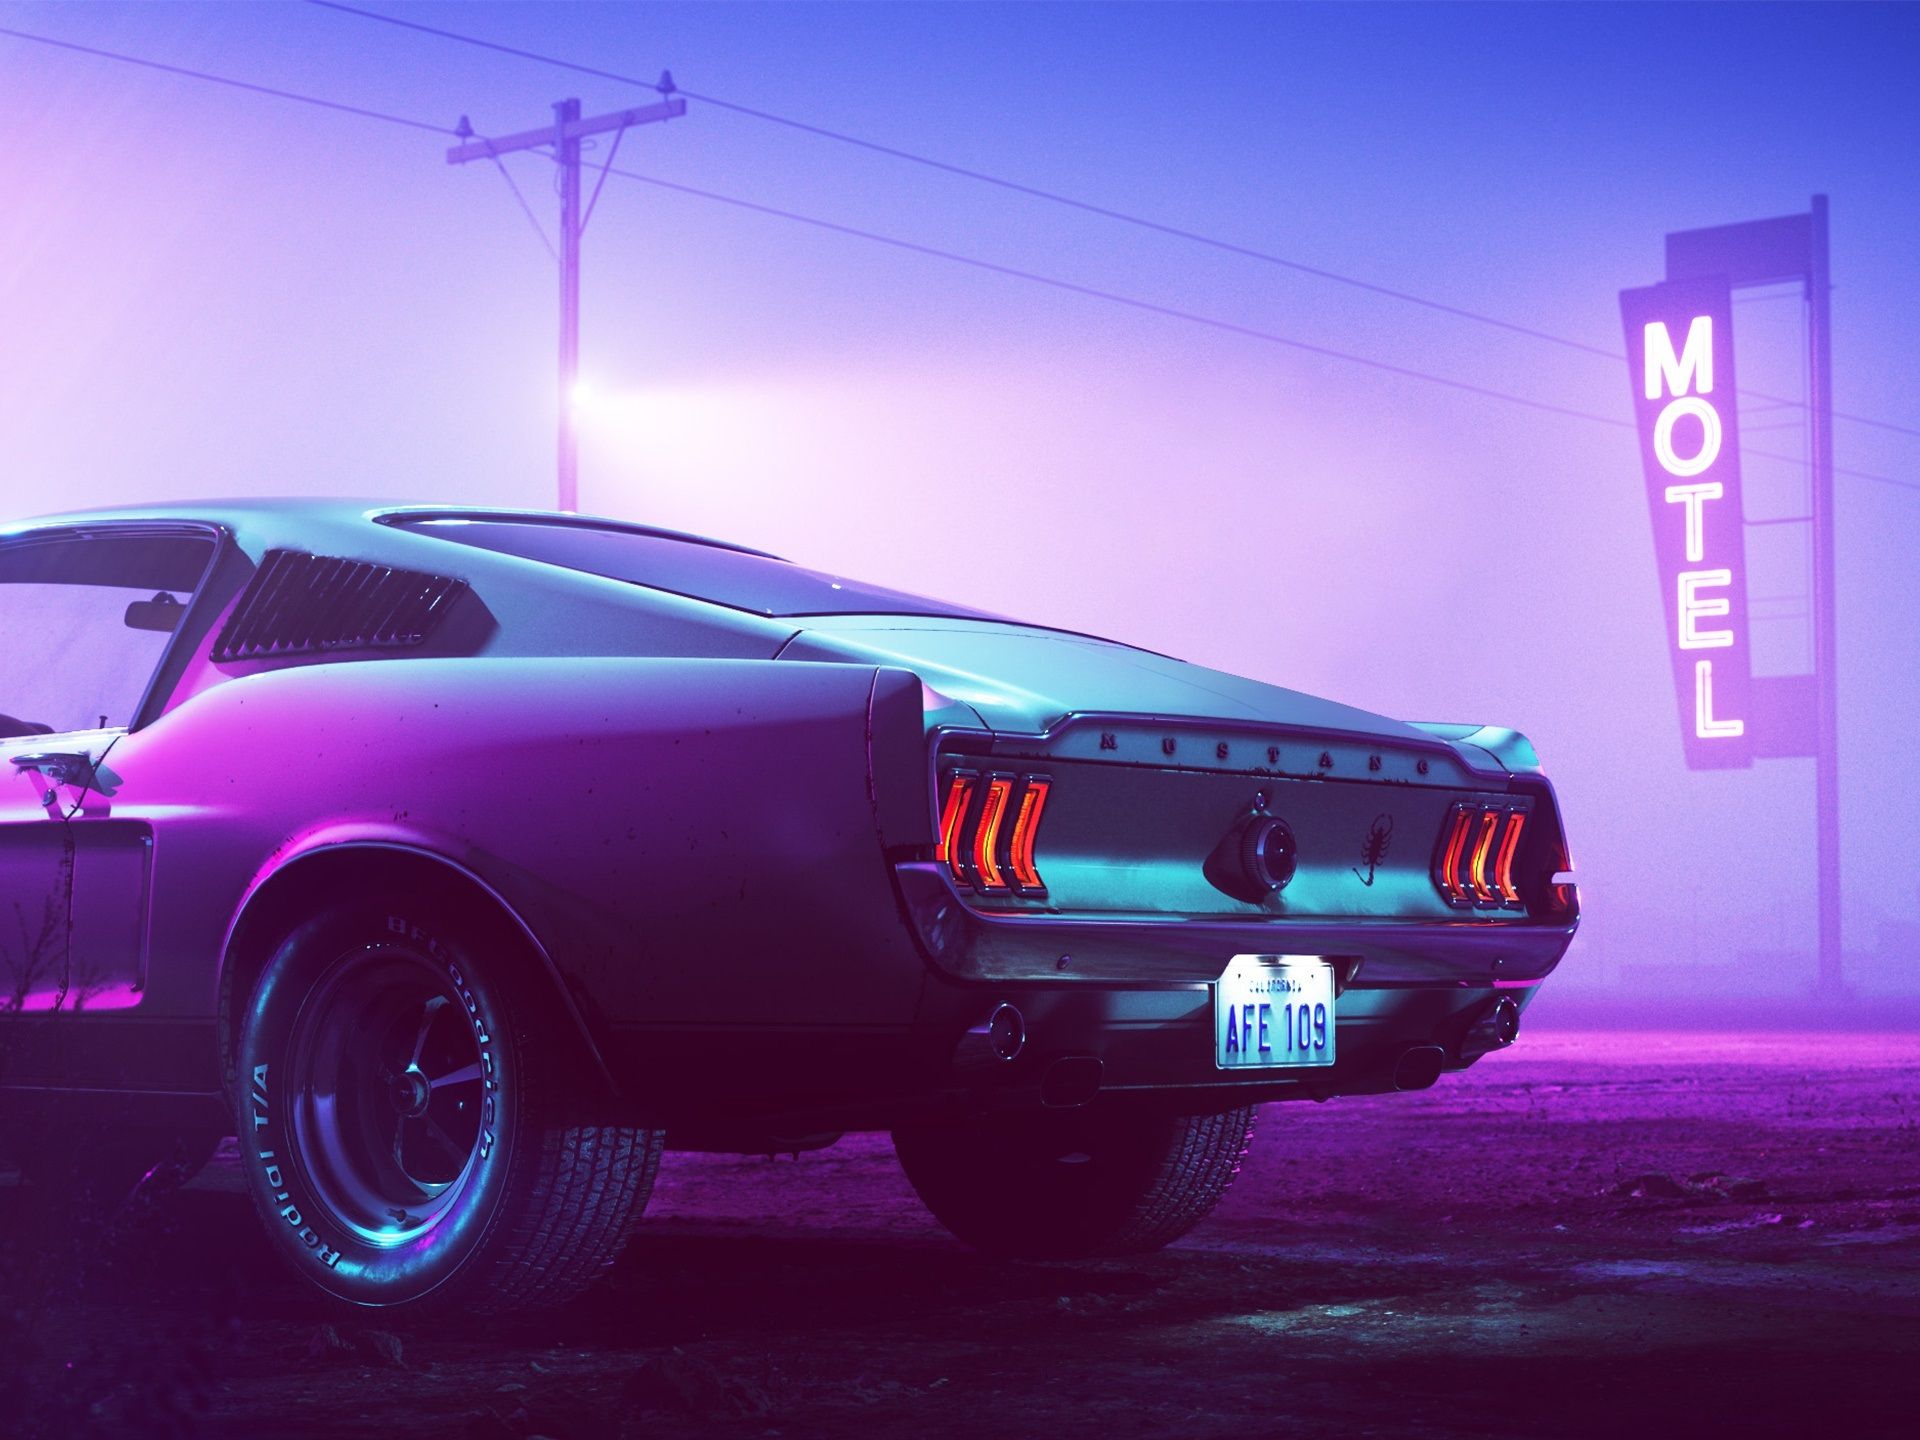 Wallpaper 1969 Ford Mustang car back view, motel, neon, night 2560x1440 QHD Picture, Image